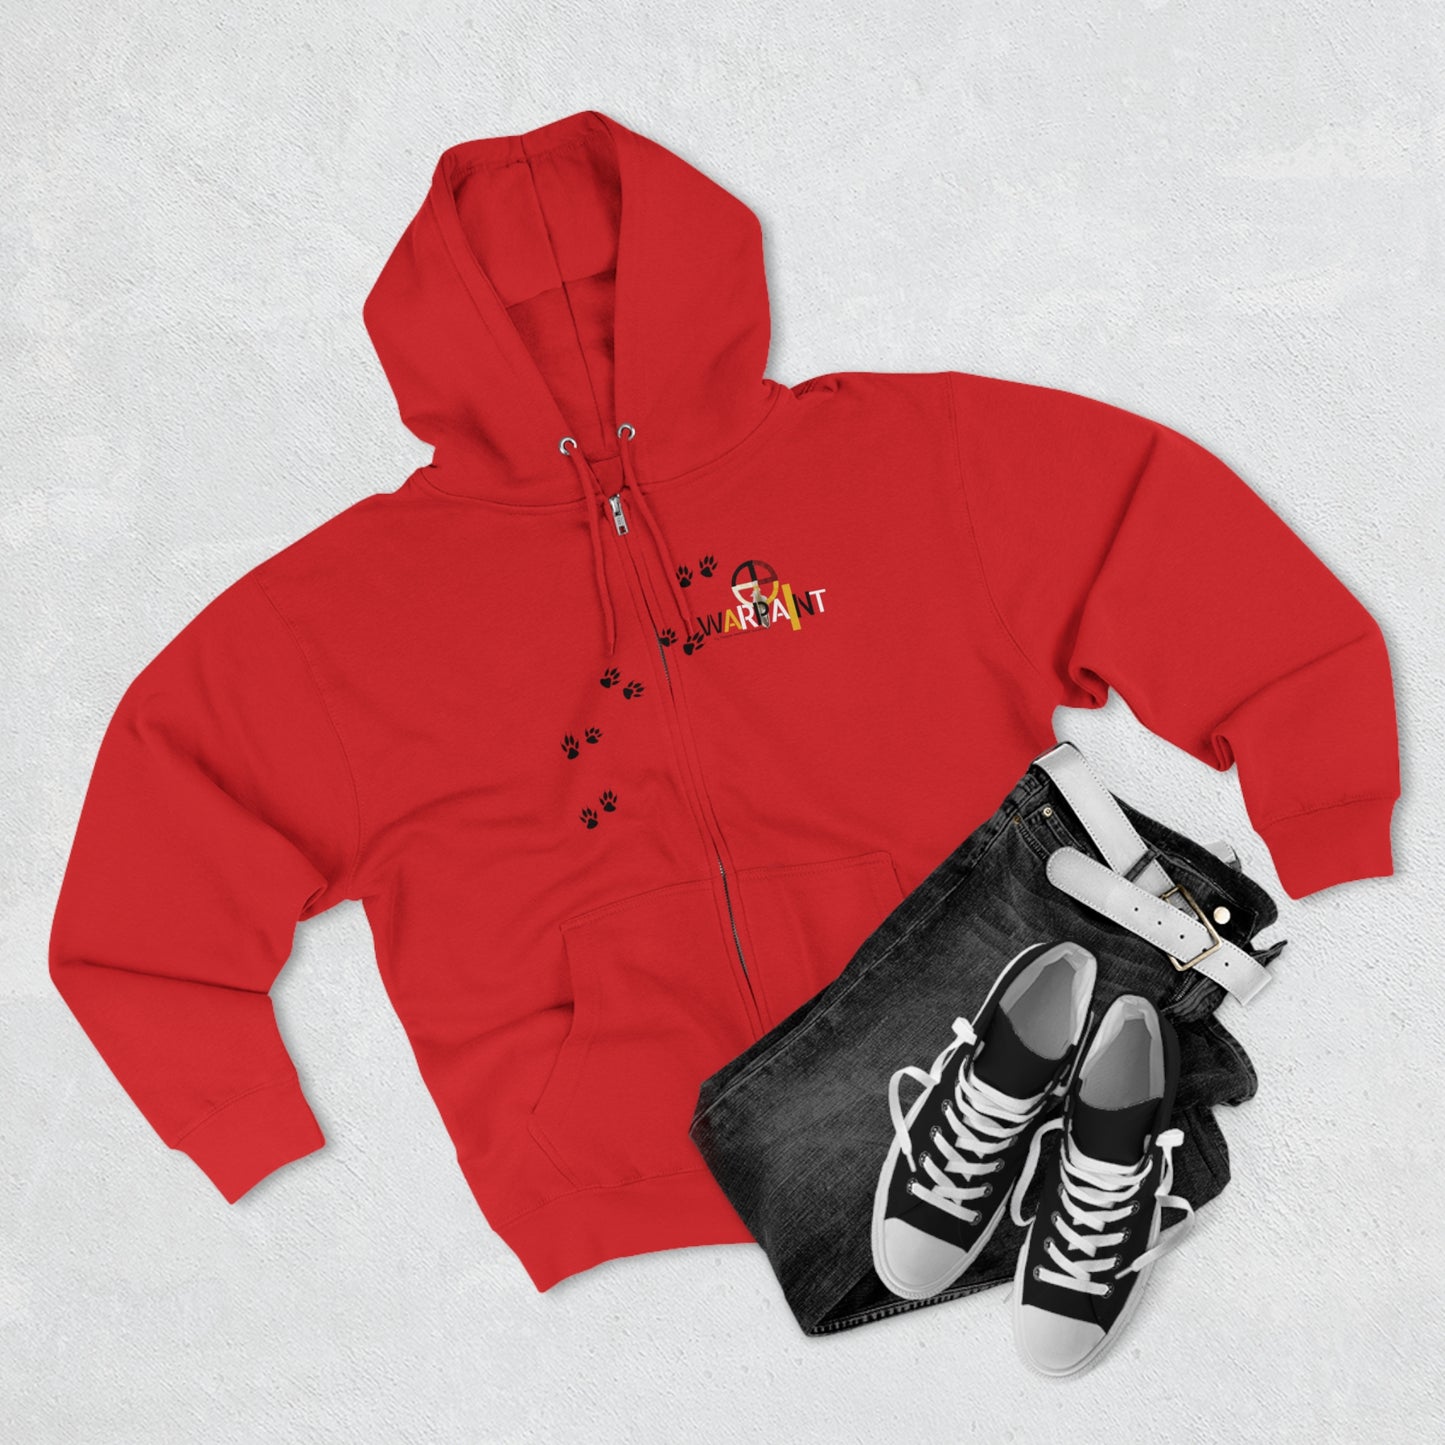 Vóóhéhéve (Morning Star) Aka Chief Dull Knife of the Notameohmésêhese (Northern Eaters) also known as Northern Cheyenne by the Government by Teague WestWolf GoodVoice (Amskapii Pikuni) - Unisex Zip Hoodie